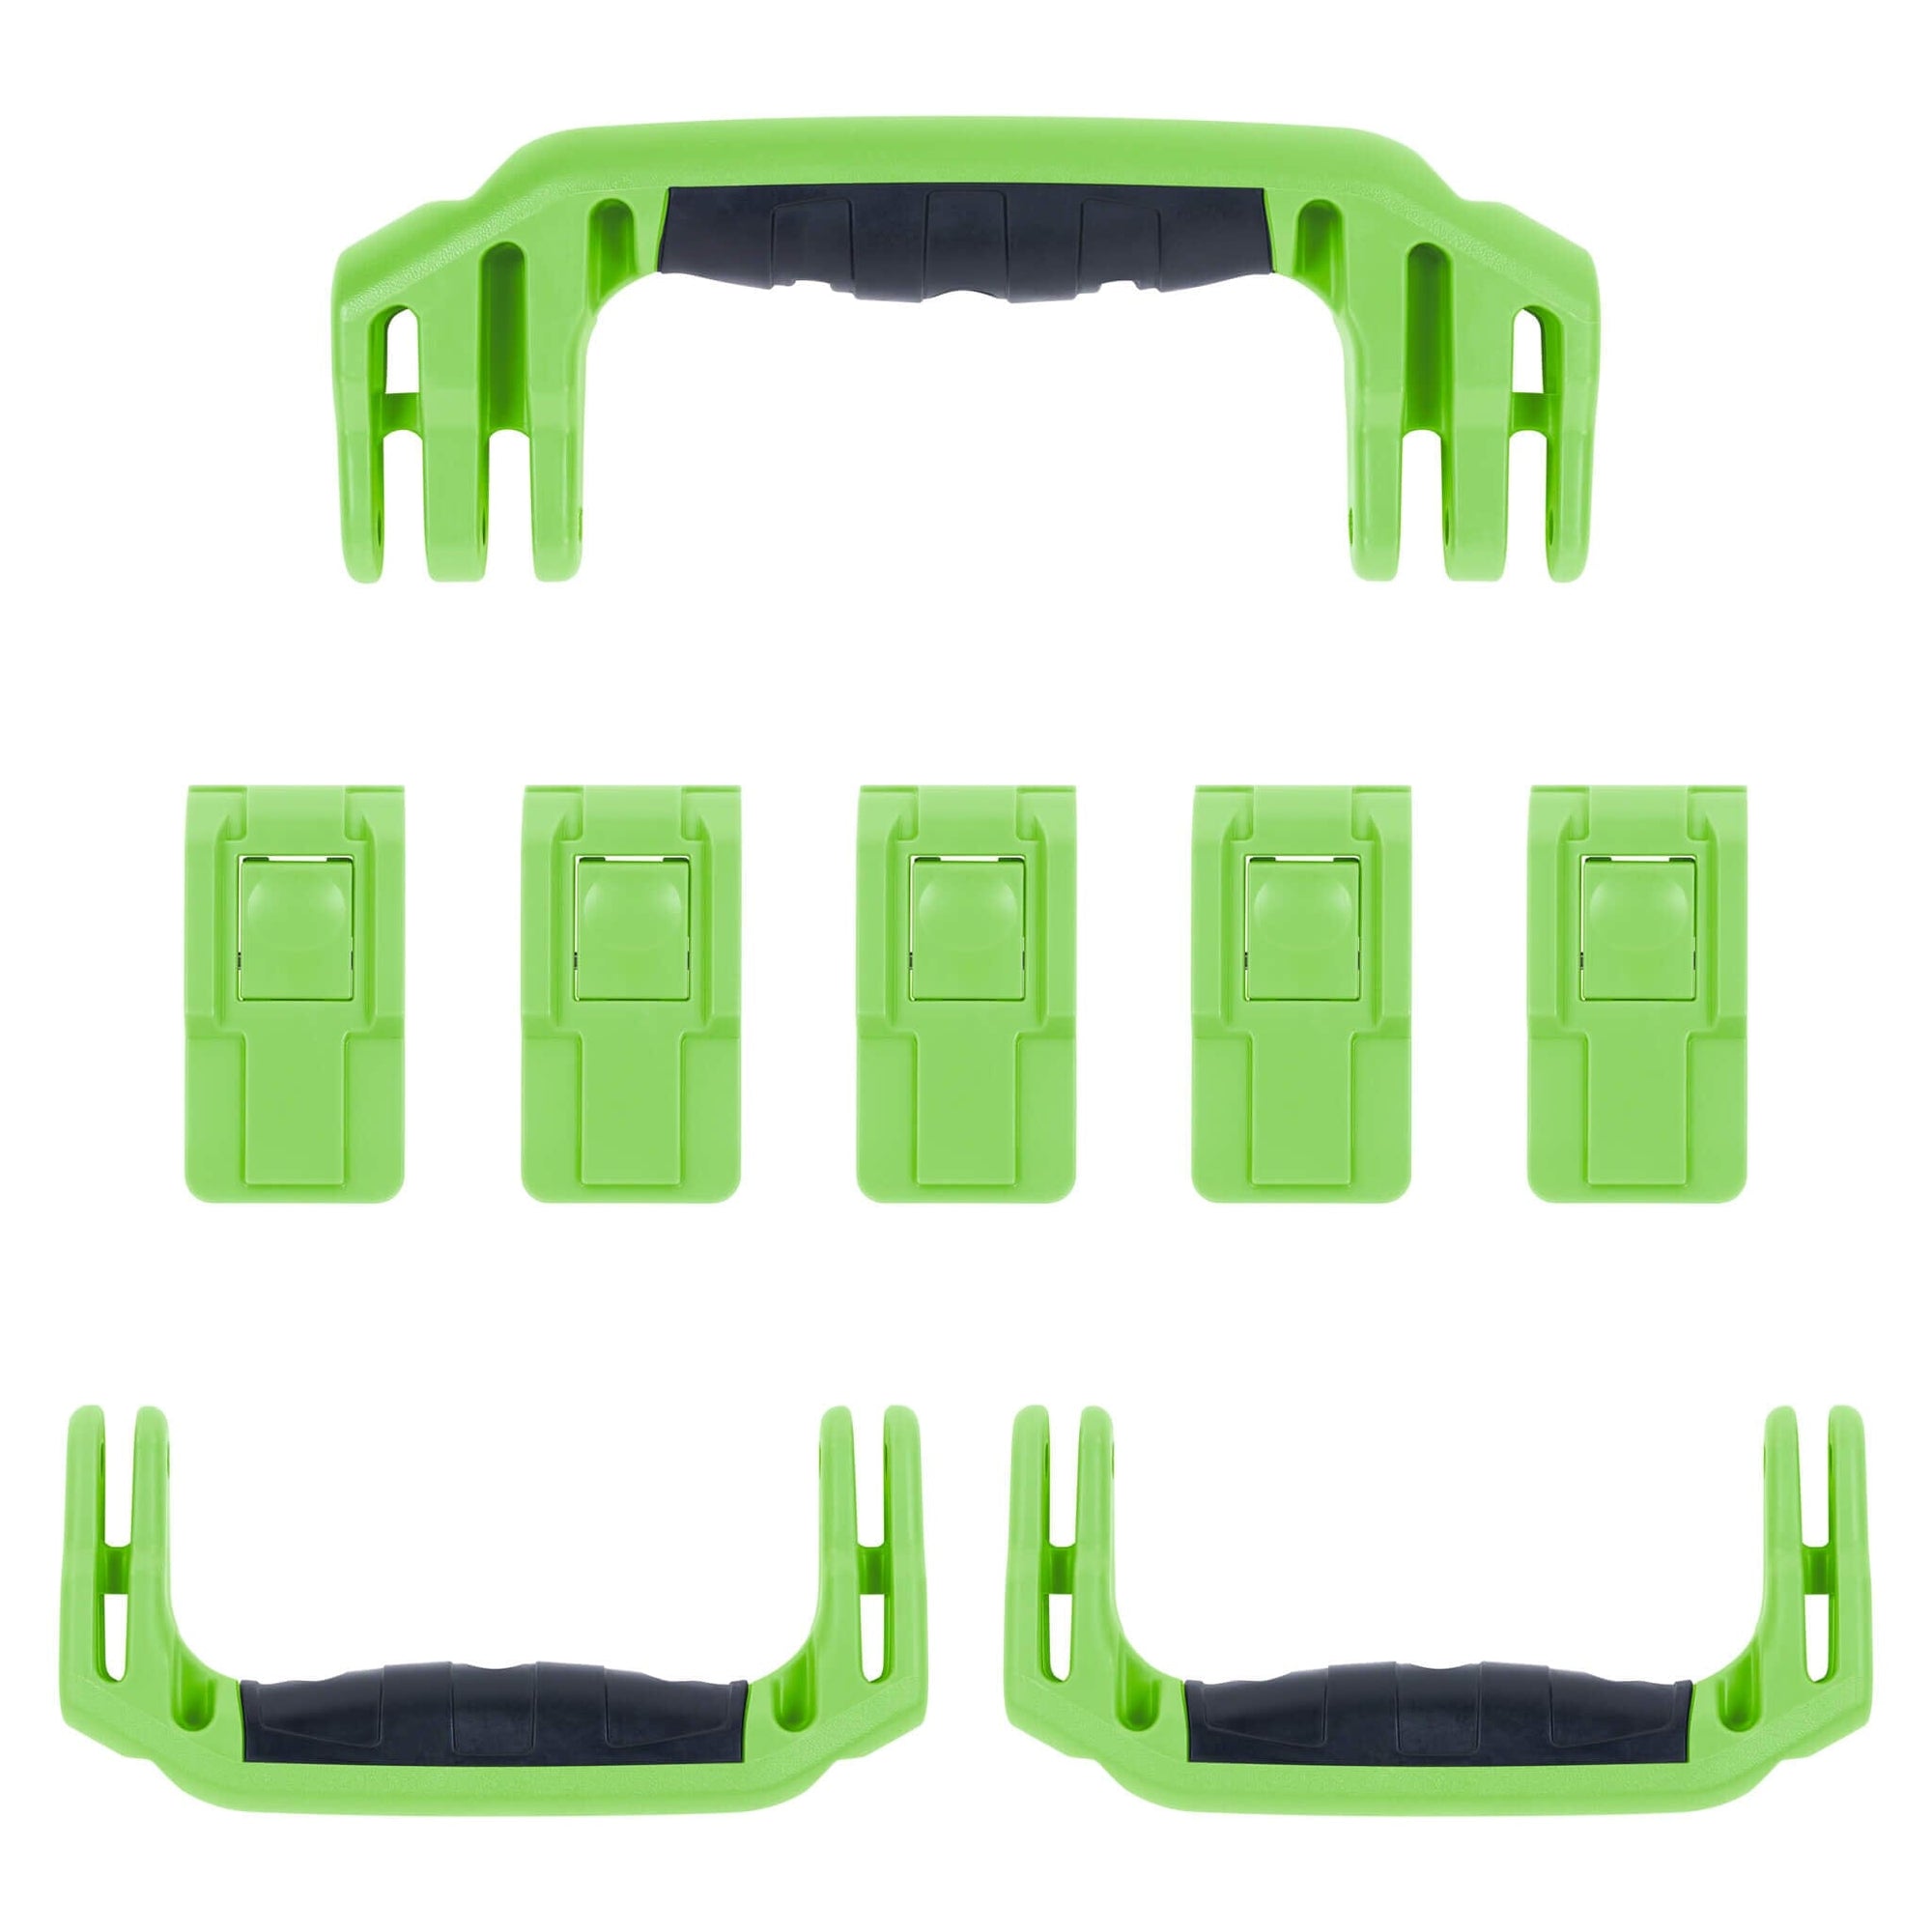 Pelican 1606 Air Replacement Handles & Latches, Lime Green (Set of 3 Handles, 5 Latches) ColorCase 